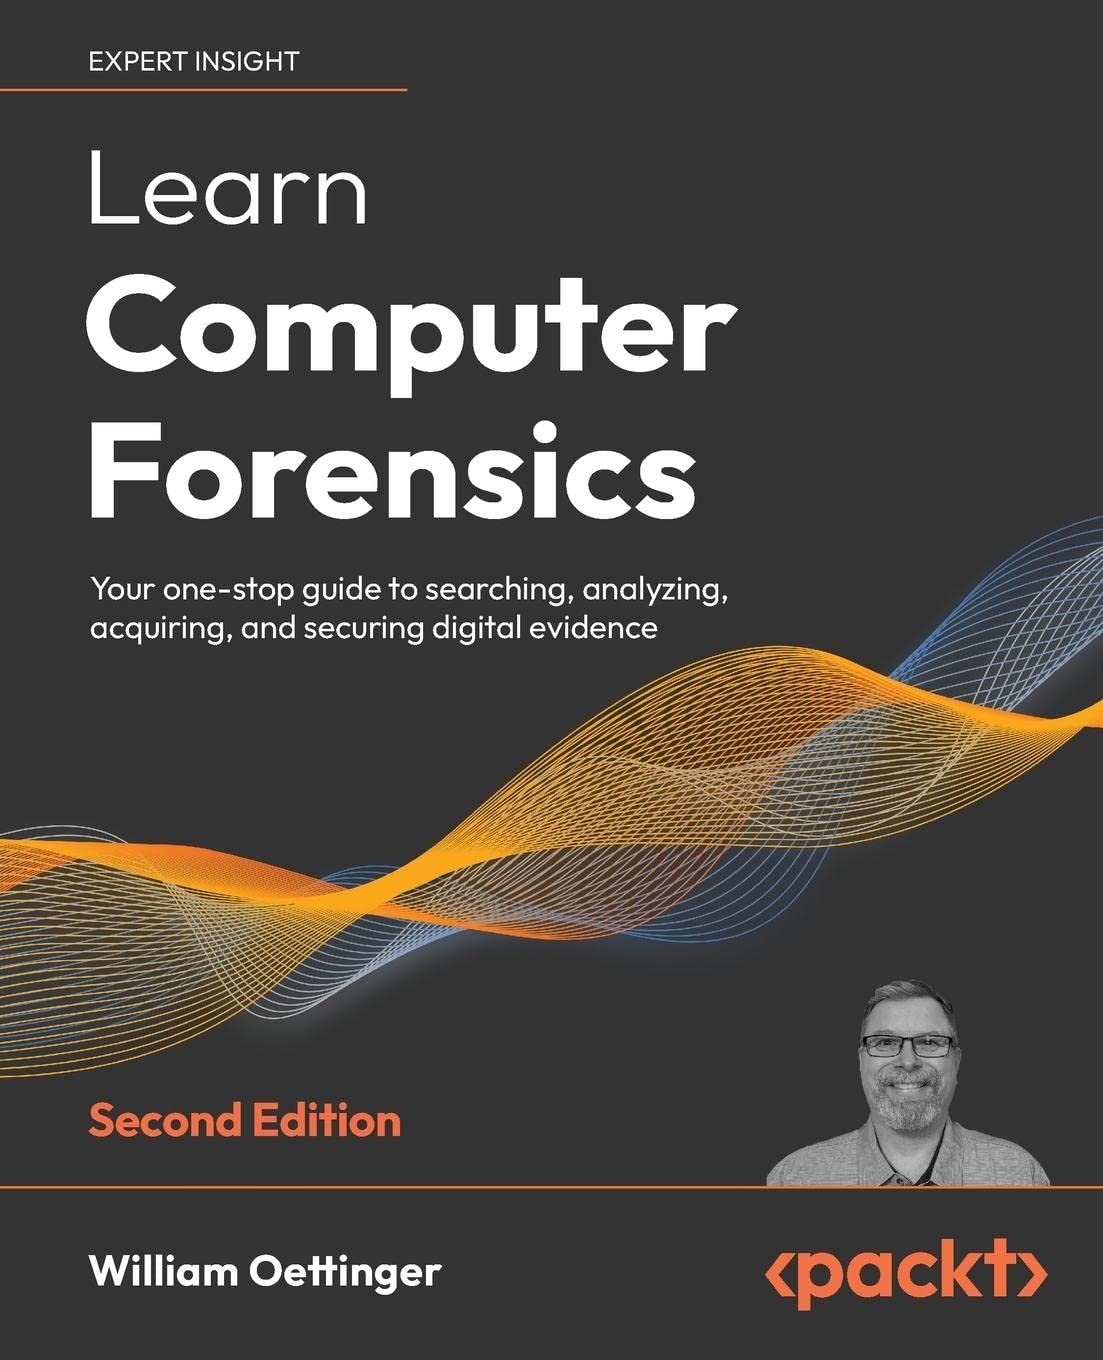 Learn Computer Forensics: Your one-stop guide to searching, analyzing, acquiring, and securing digital evidence, 2nd Edition by William Oettinger 